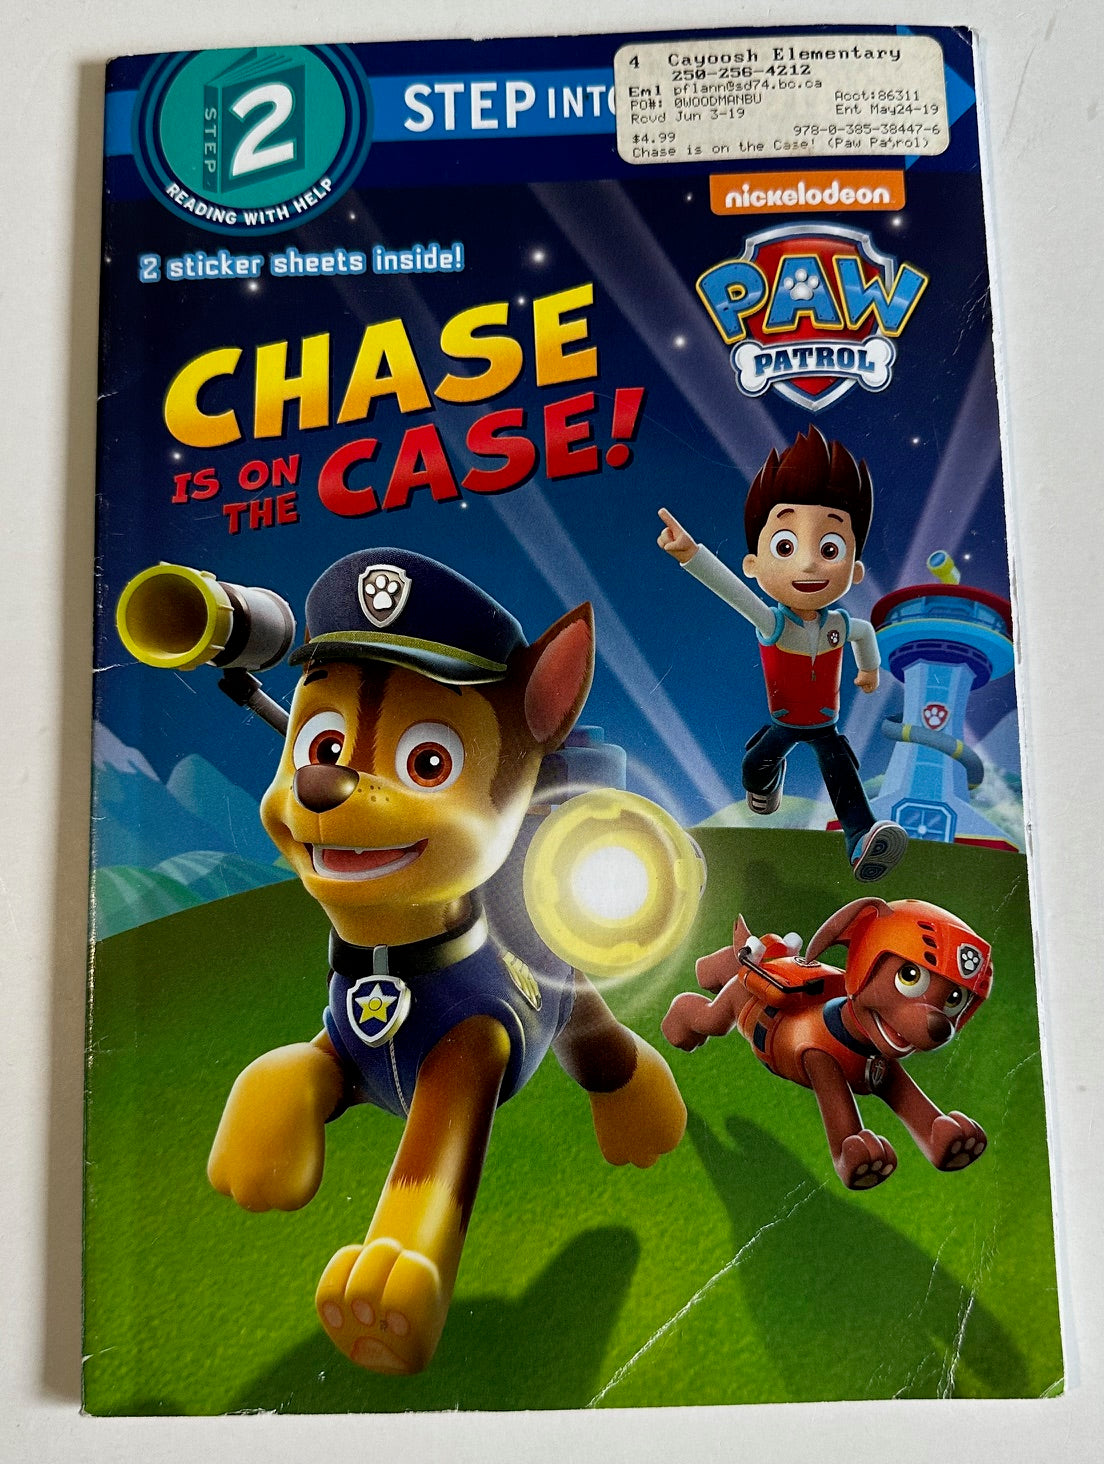 "Chase is on the Case!"